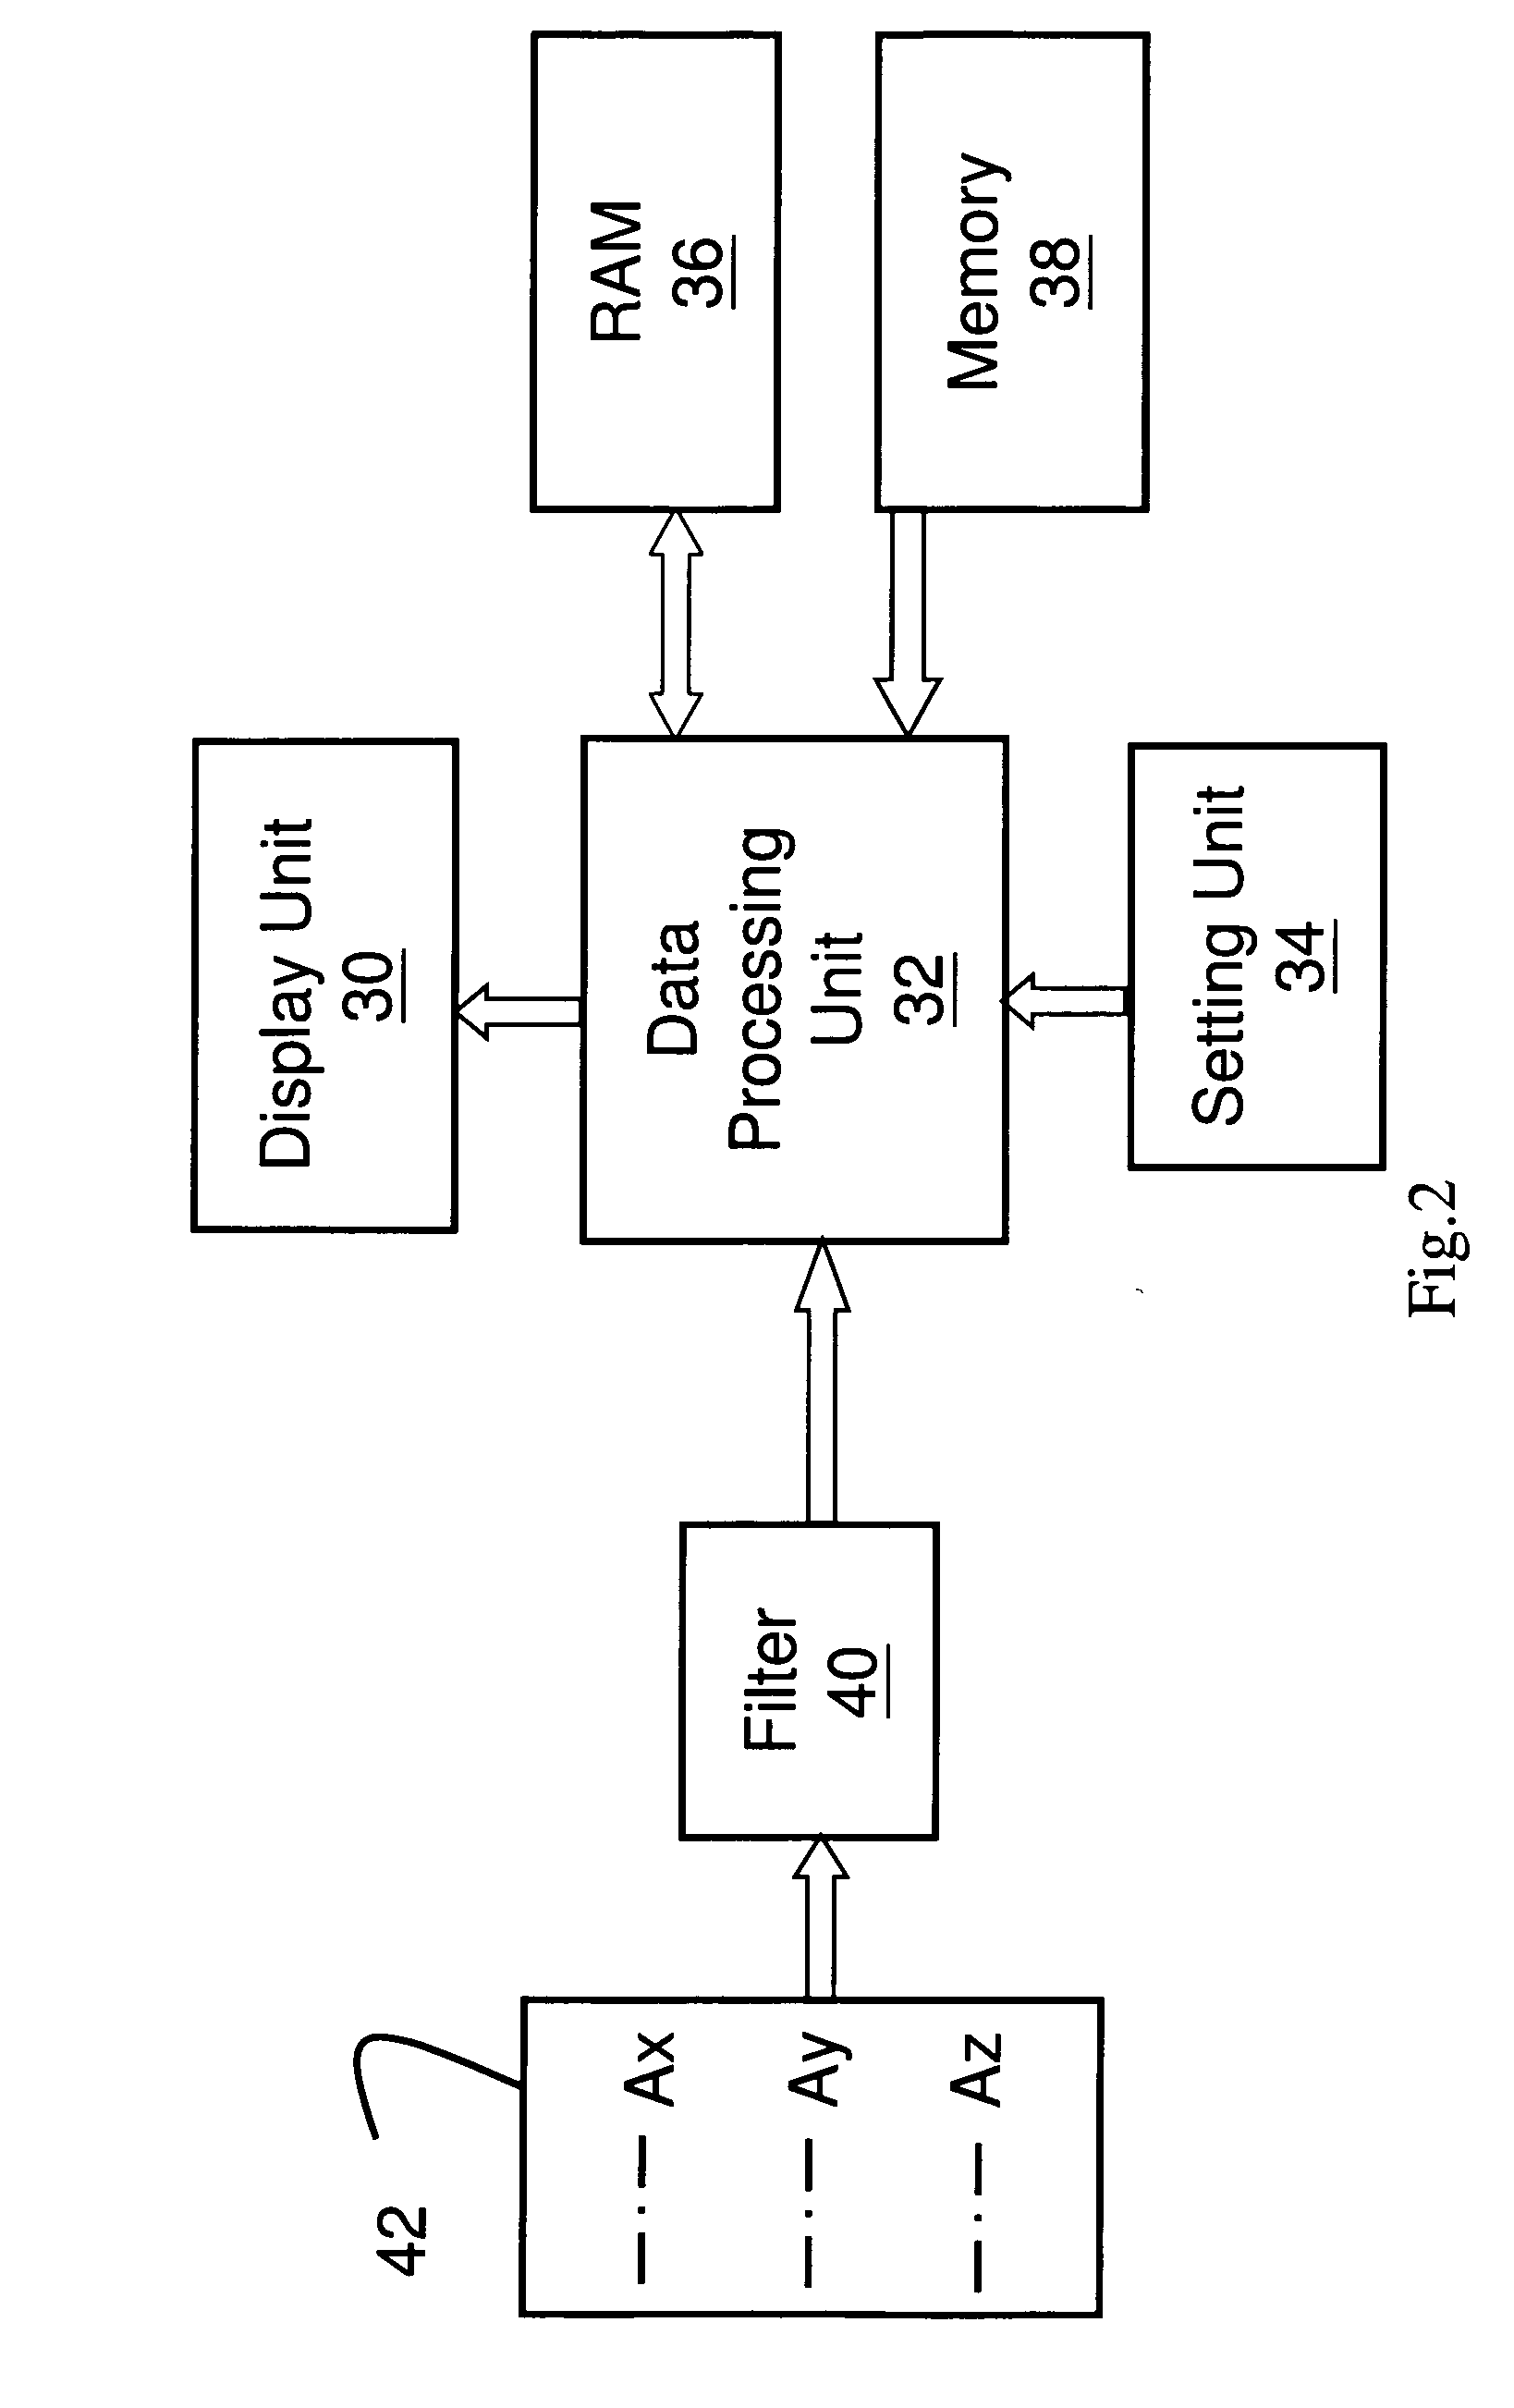 Apparatus and Method for Counting Exercise Repetitions